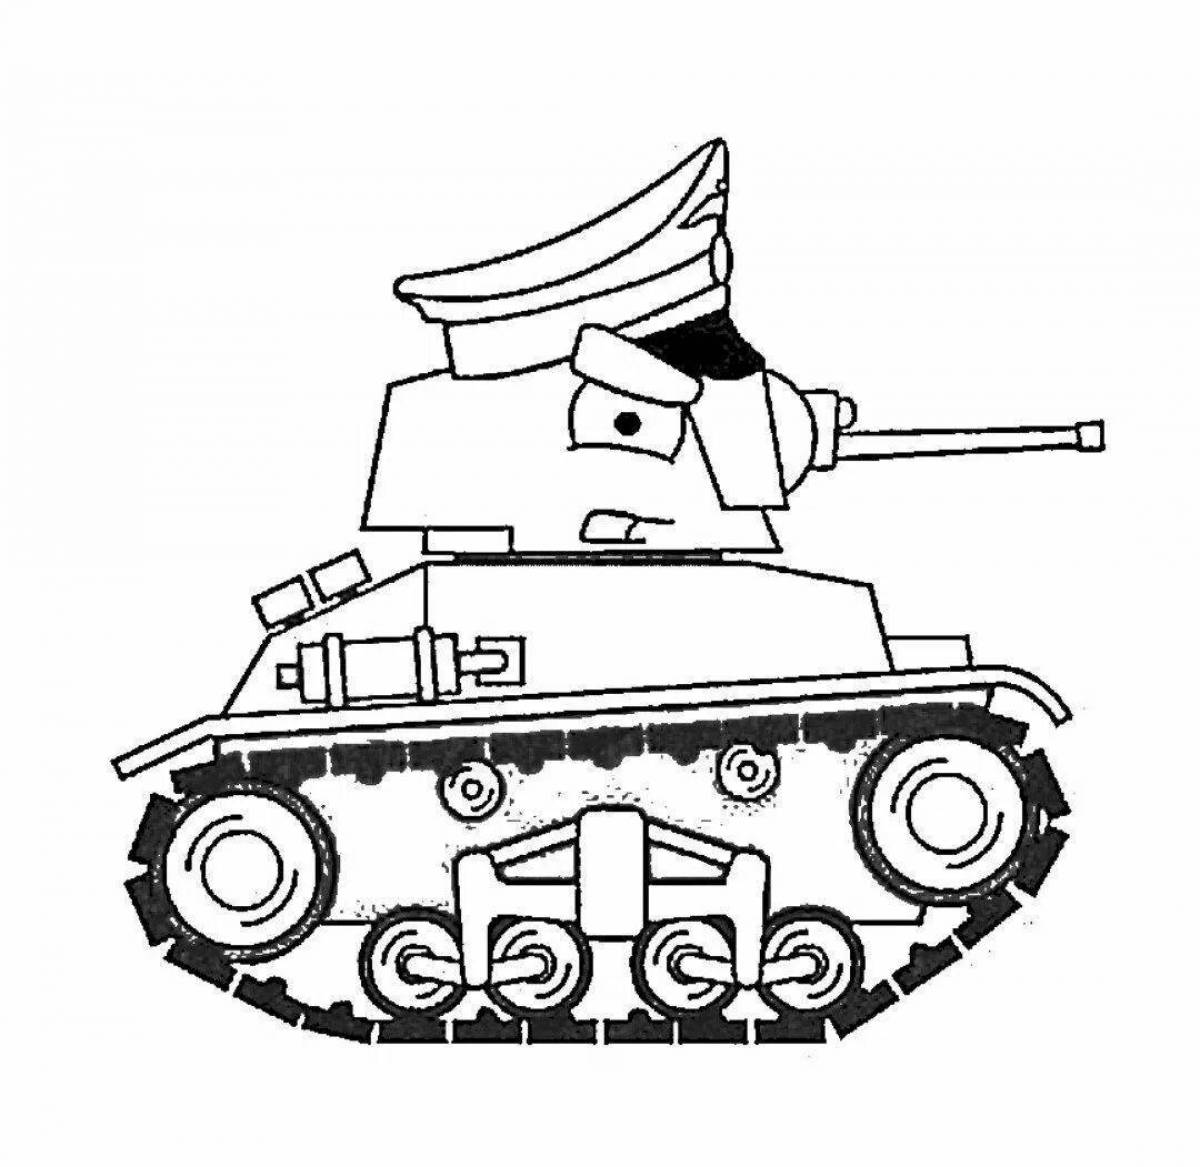 Kv44 radiant tank coloring page